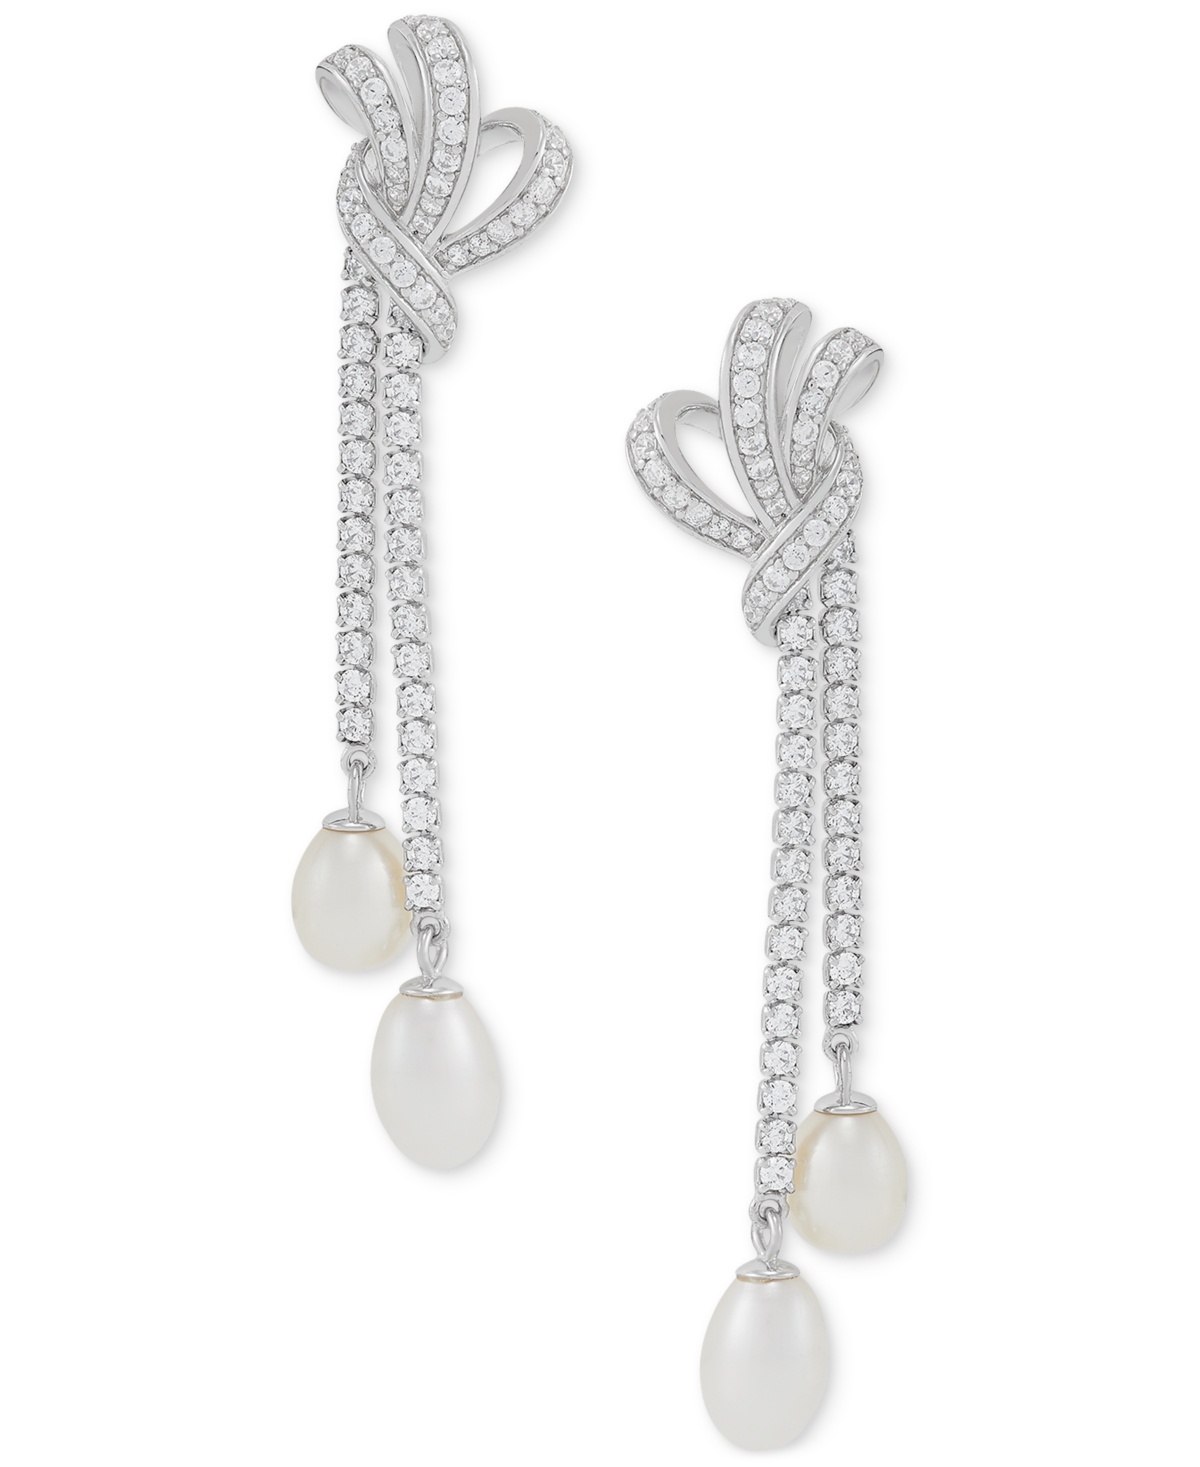 Freshwater Pearl (8x6mm & 7x5mm) Cubic Zirconia Knotted Drop Earrings in Sterling Silver - Sterling Silver